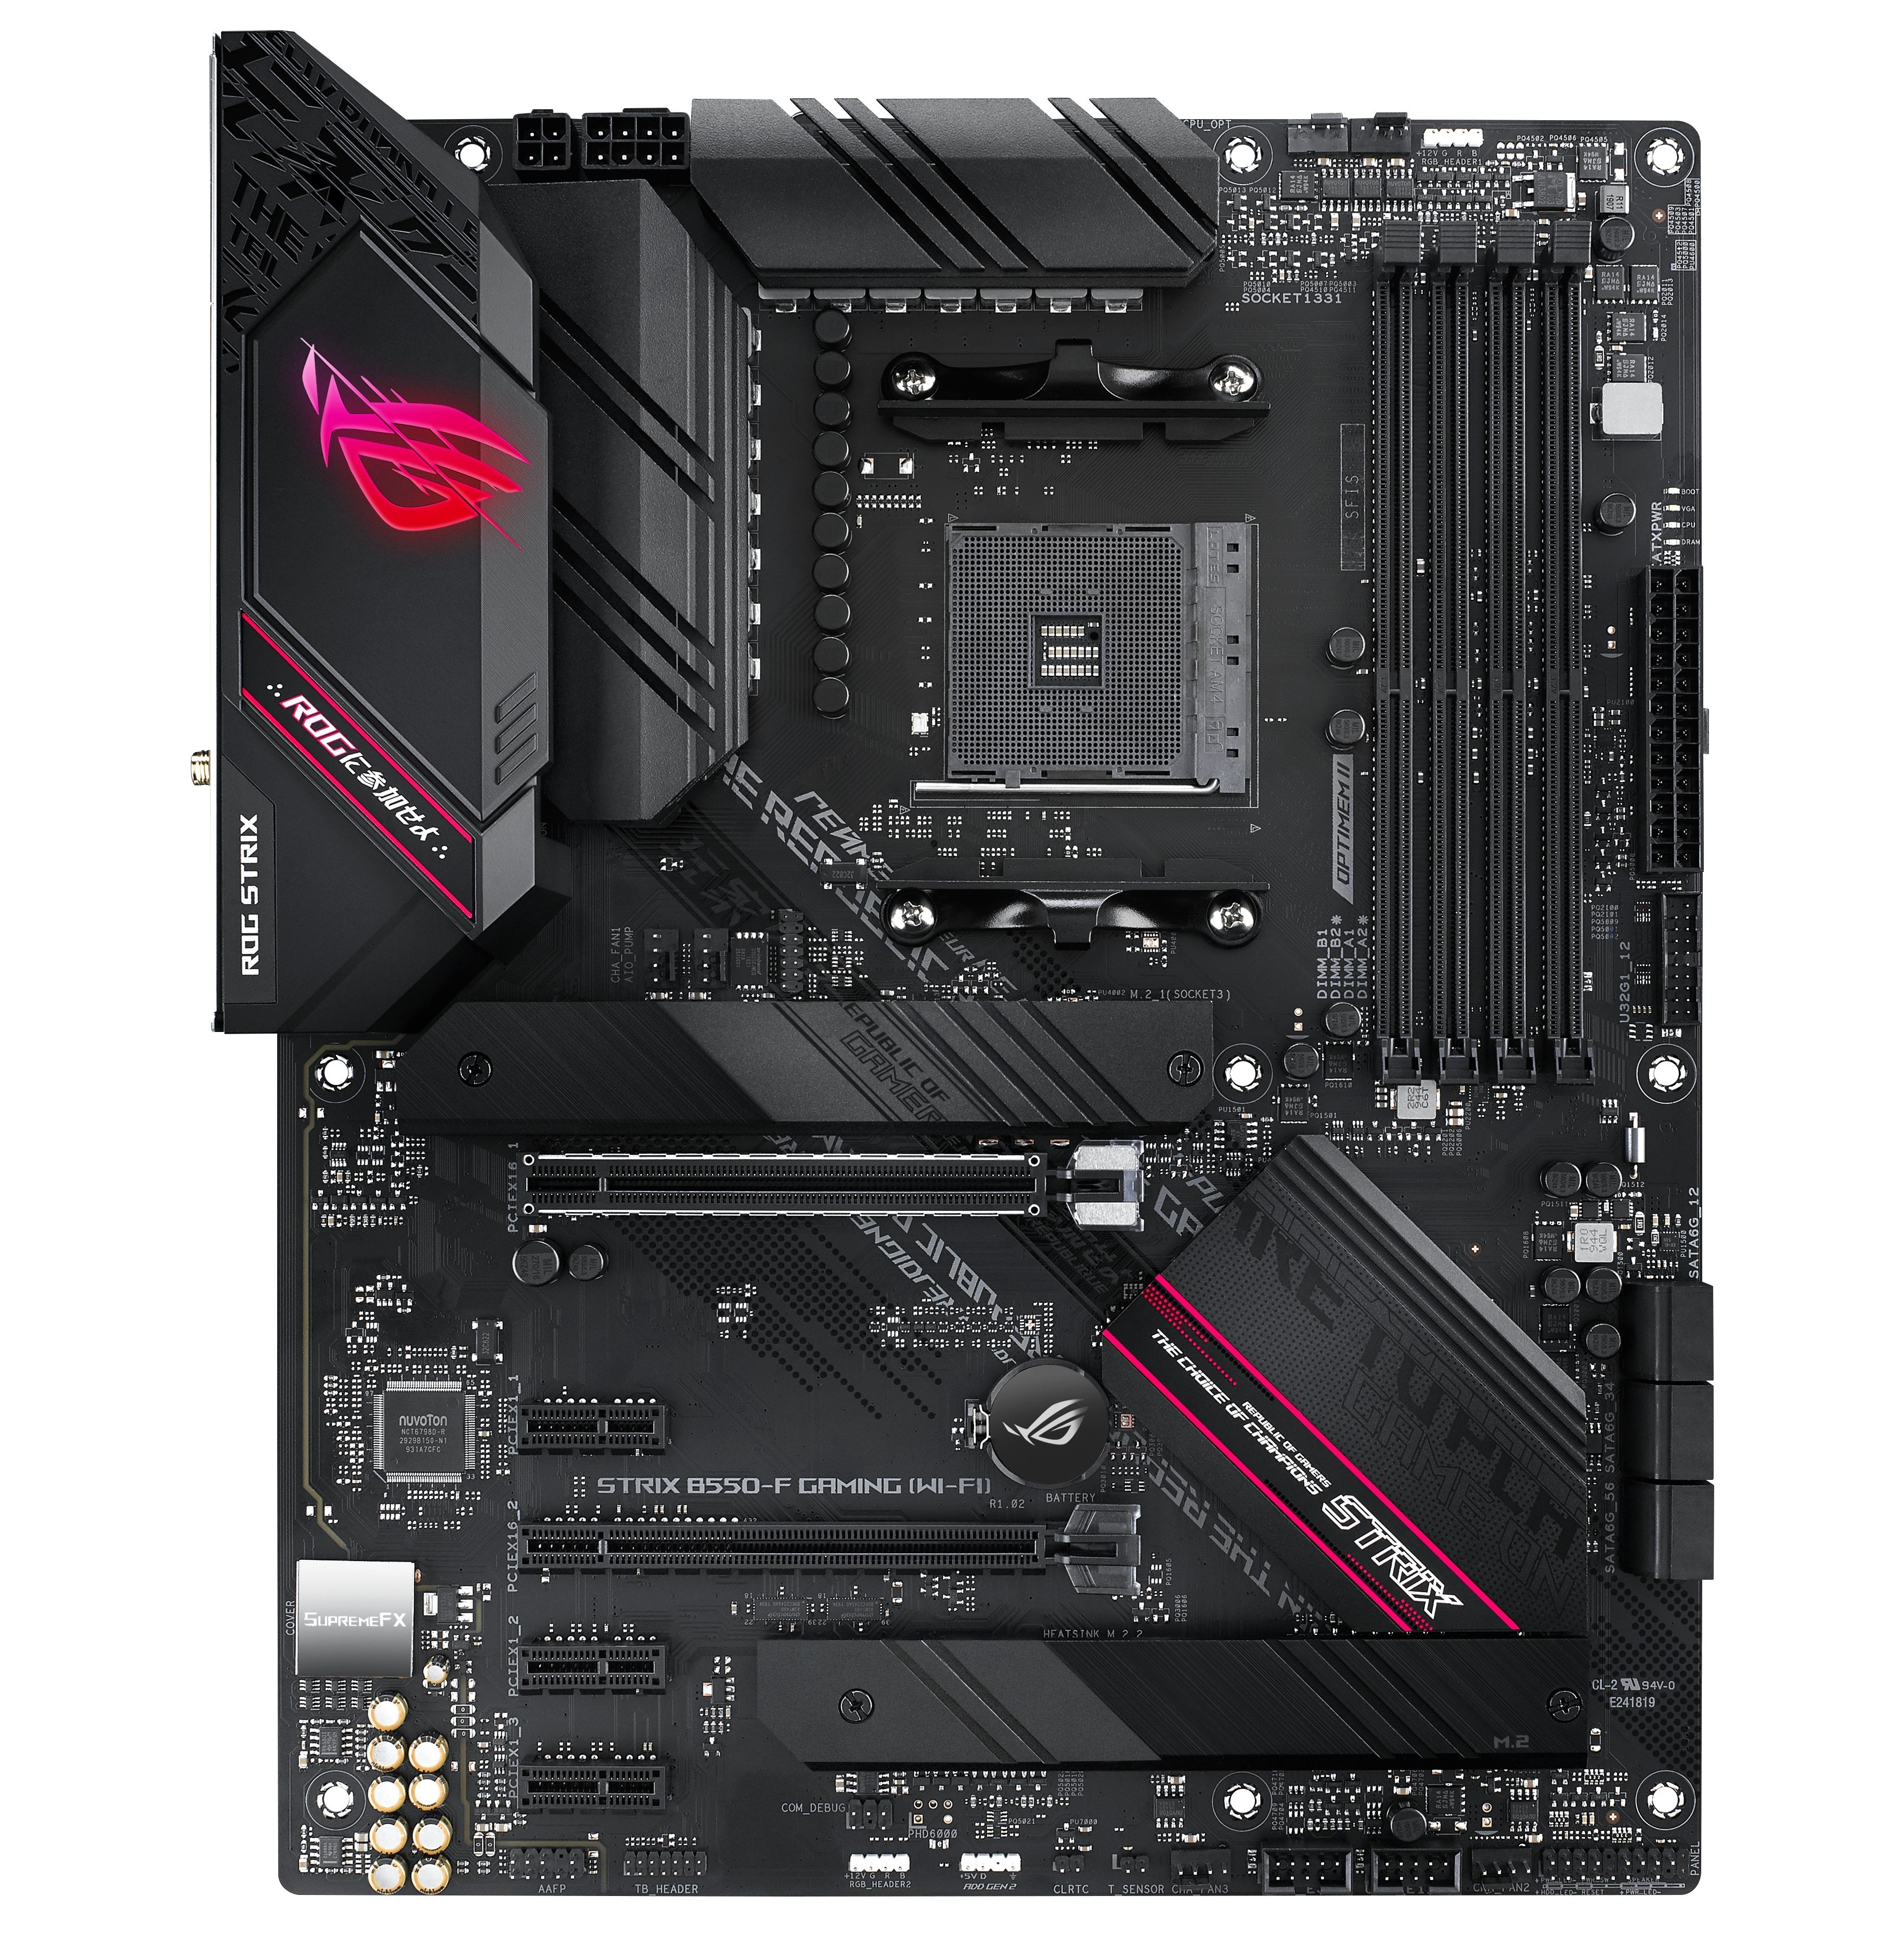 Asus Rog Strix B550 F Gaming Wi Fi The Amd B550 Motherboard Overview Asus Gigabyte Msi Asrock And Others